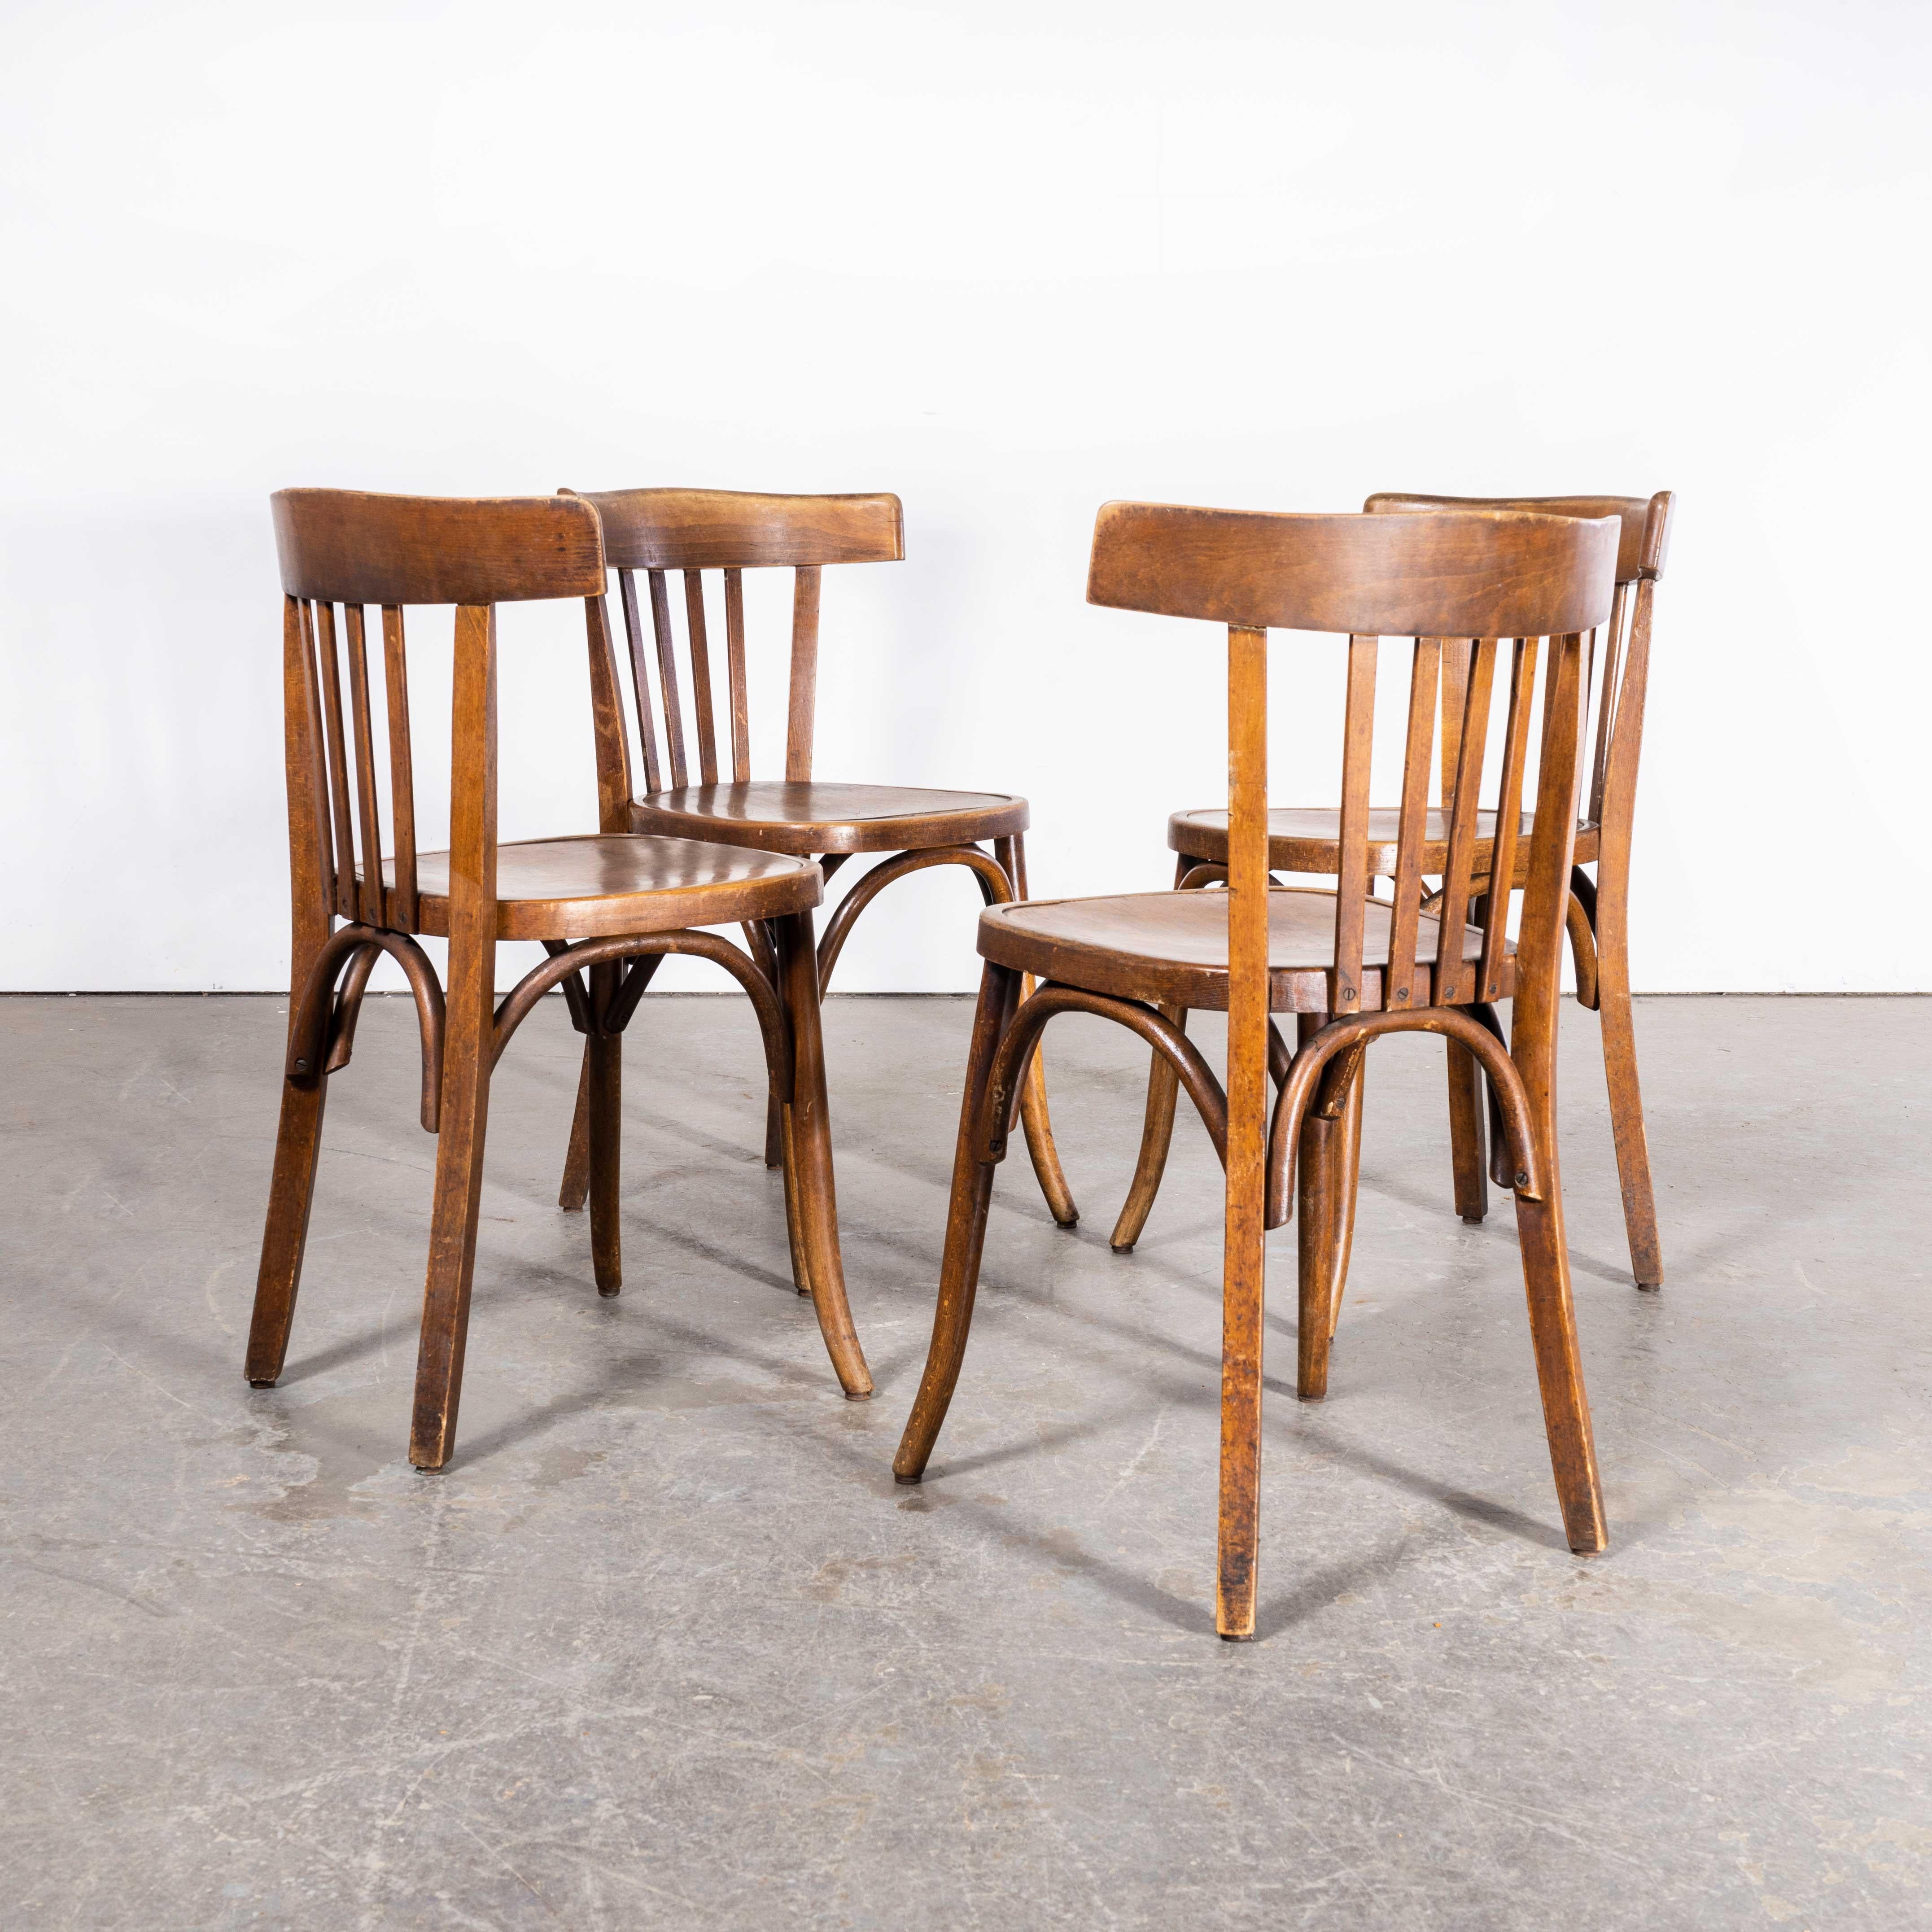 1940’s Fischel French Deep Back Bentwood Dining Chairs – Set Of Four
1930’s Fischel French Ox Back Bentwood Dining Chairs – Set Of Four. The process of steam bending beech to create elegant chairs was discovered and developed by Thonet, but when its